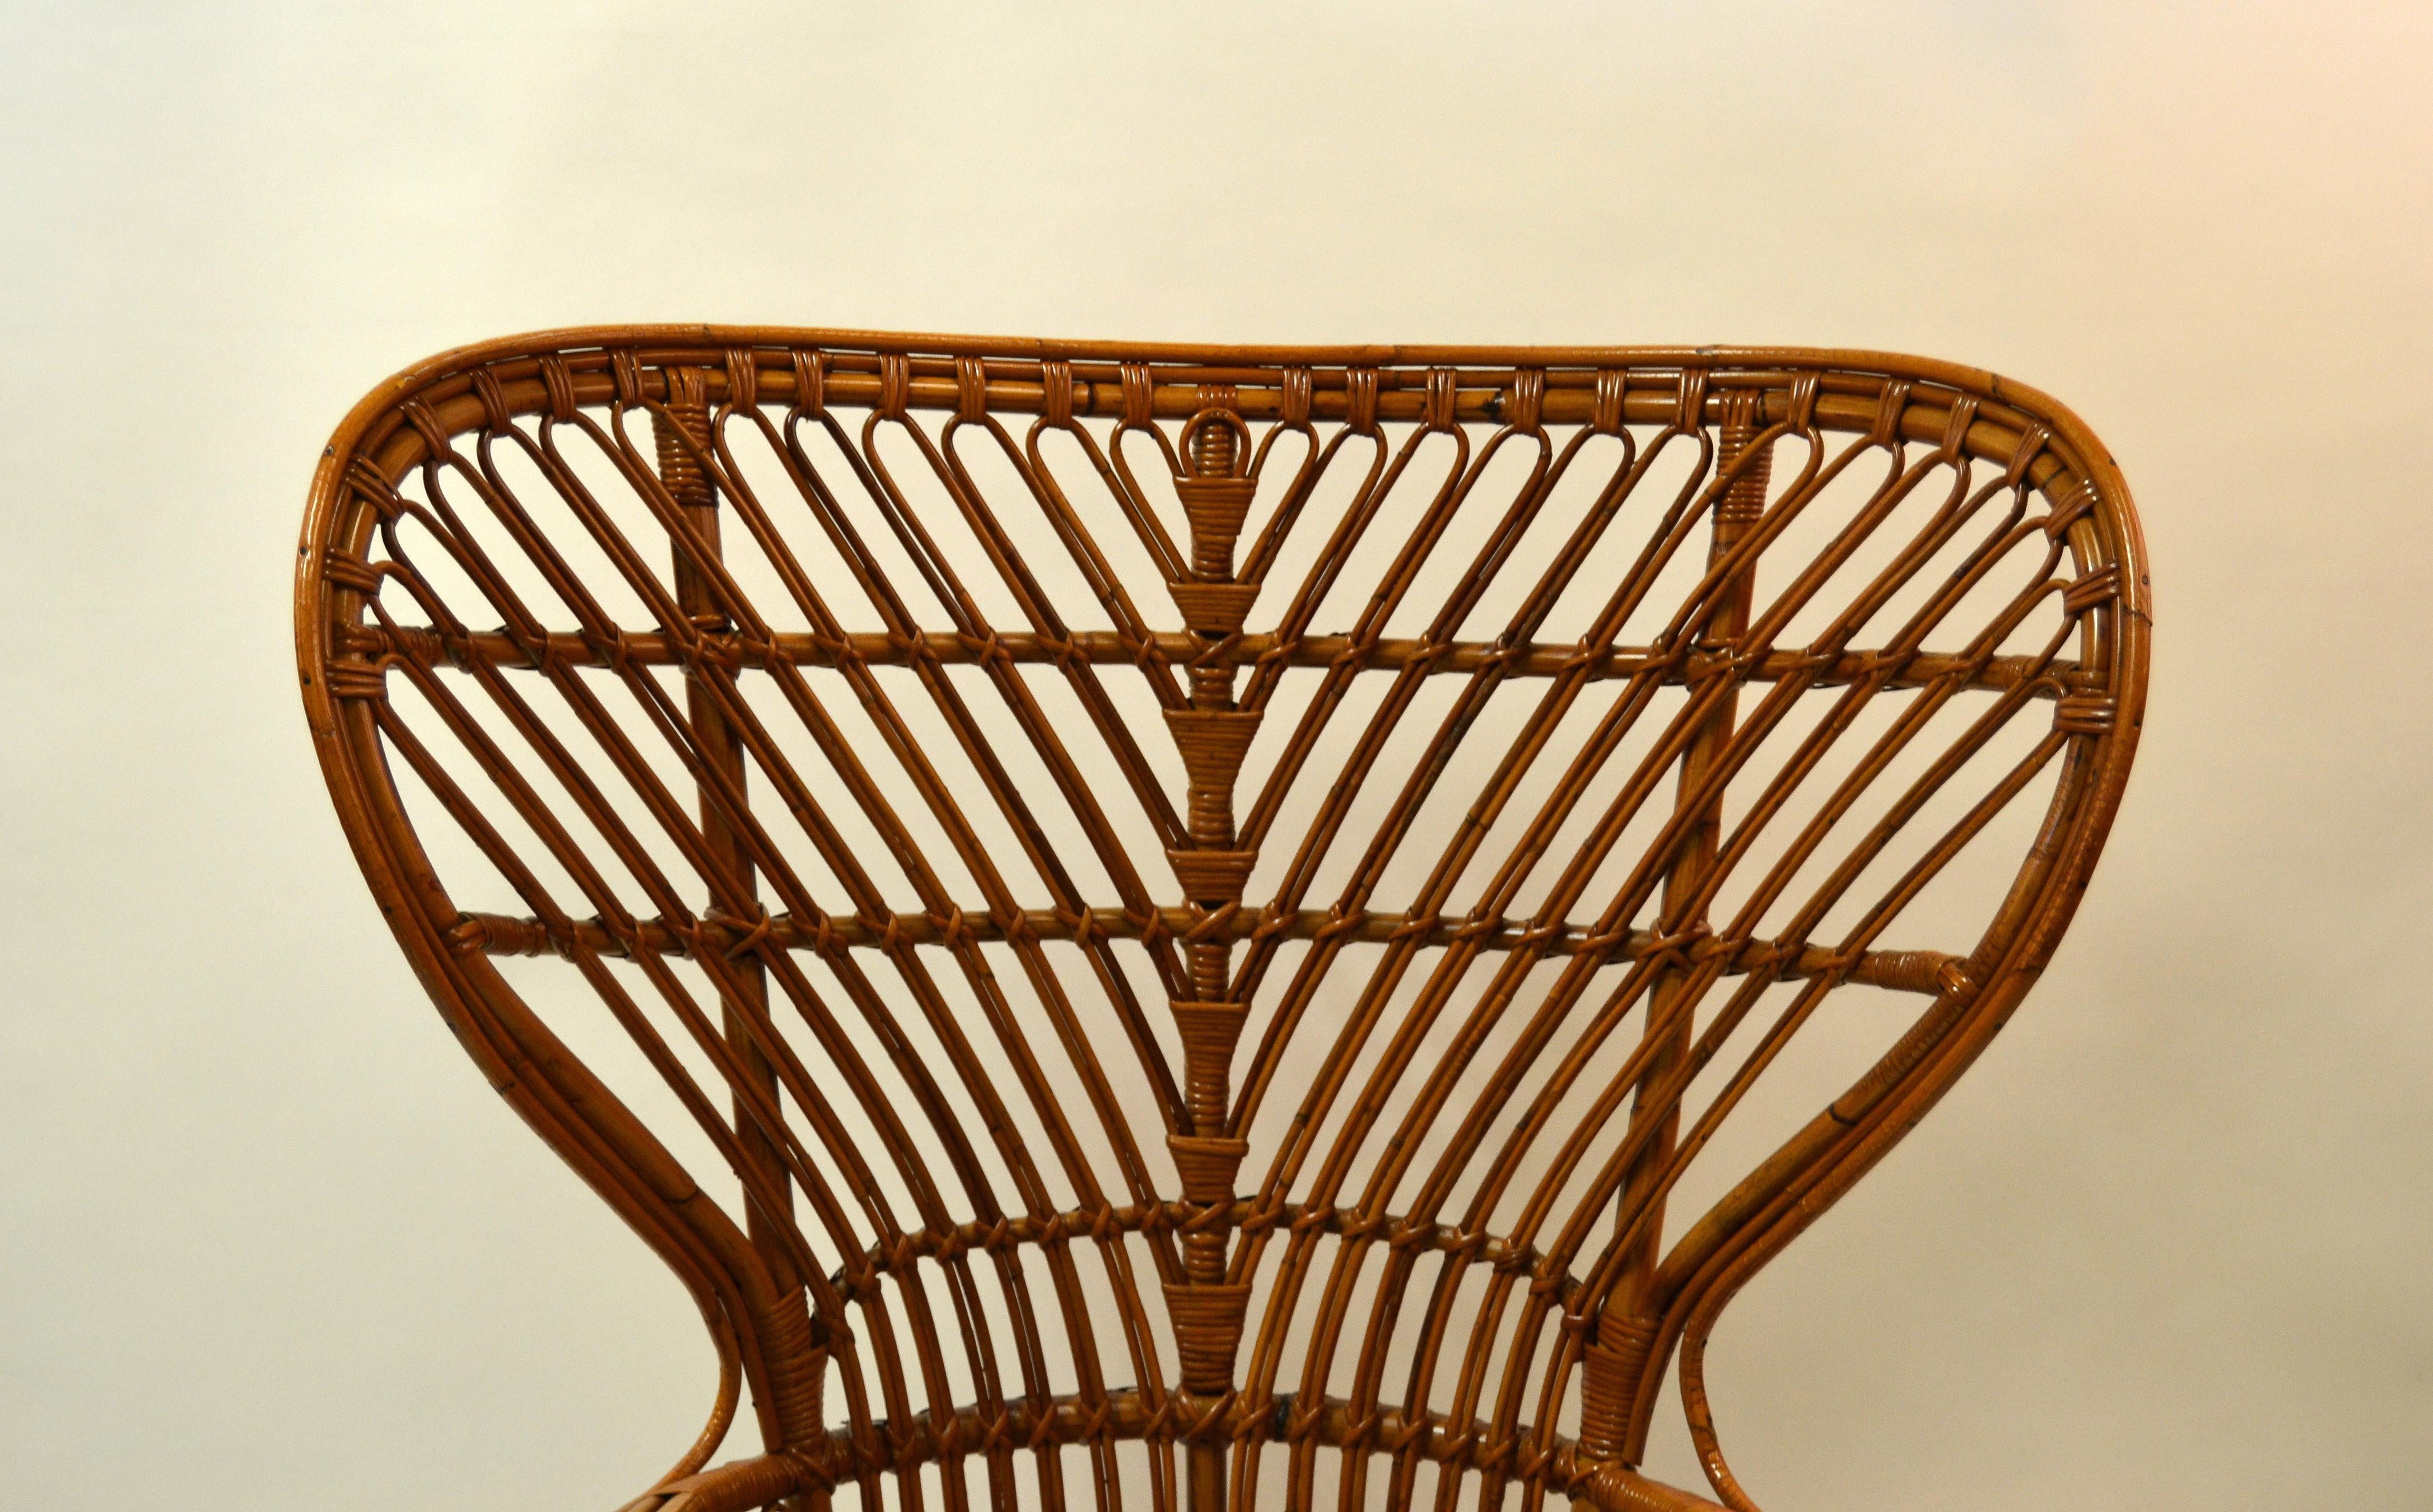 Hand-Woven Vintage Franco Albini Style Handwoven Rattan / Wicker High Back Chair, Italy